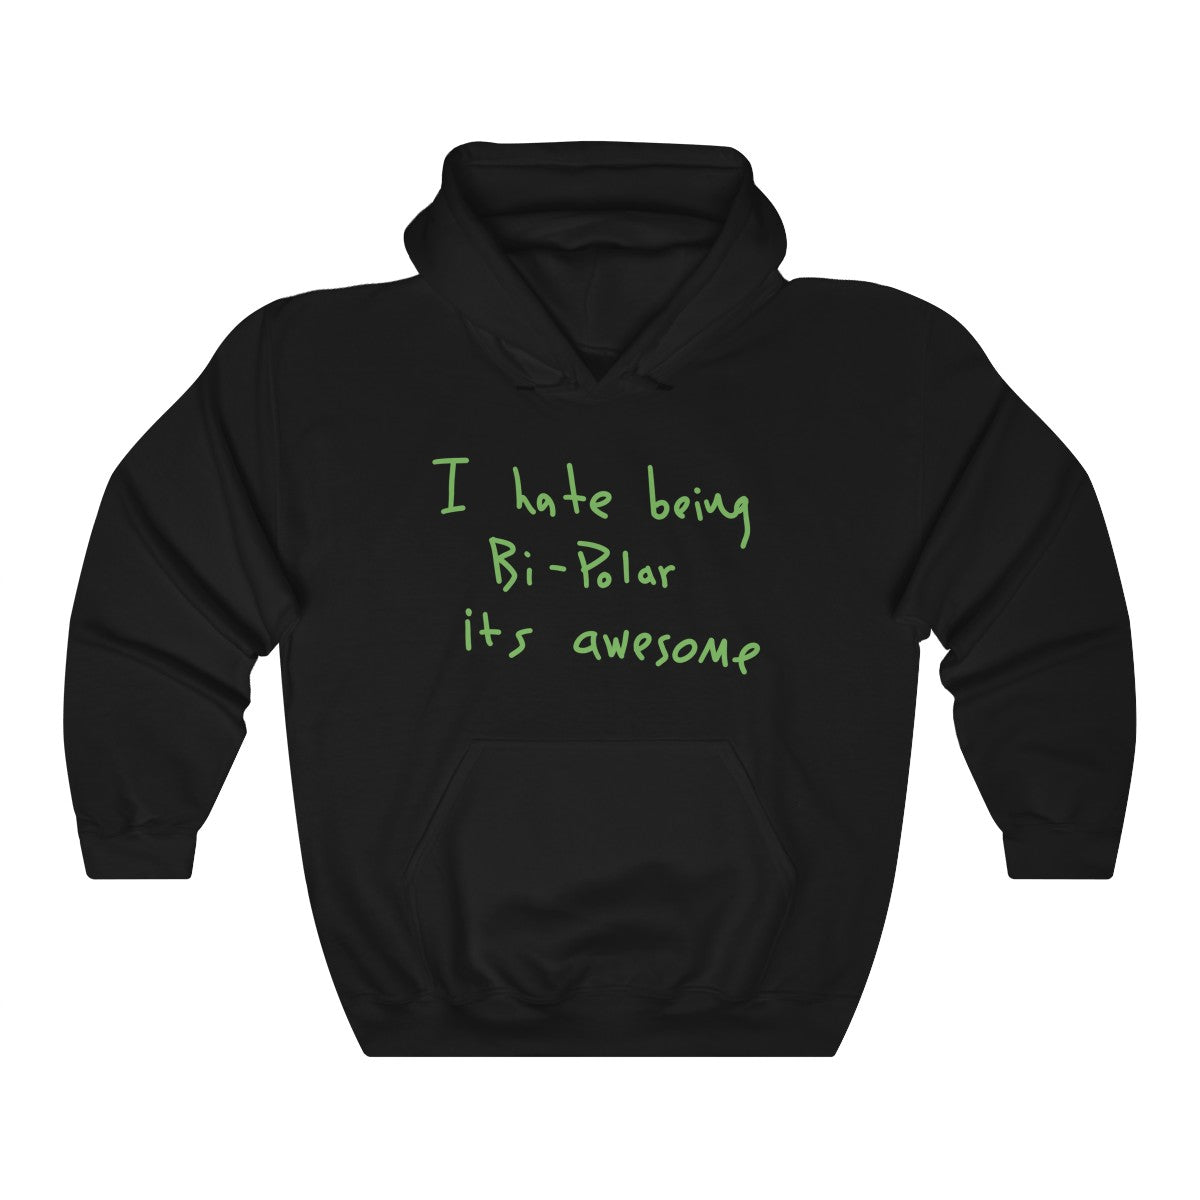 I hate being Bi-Polar it's awesome Kanye West inspired Heavy Blend™ Hoodie-Black-L-Archethype